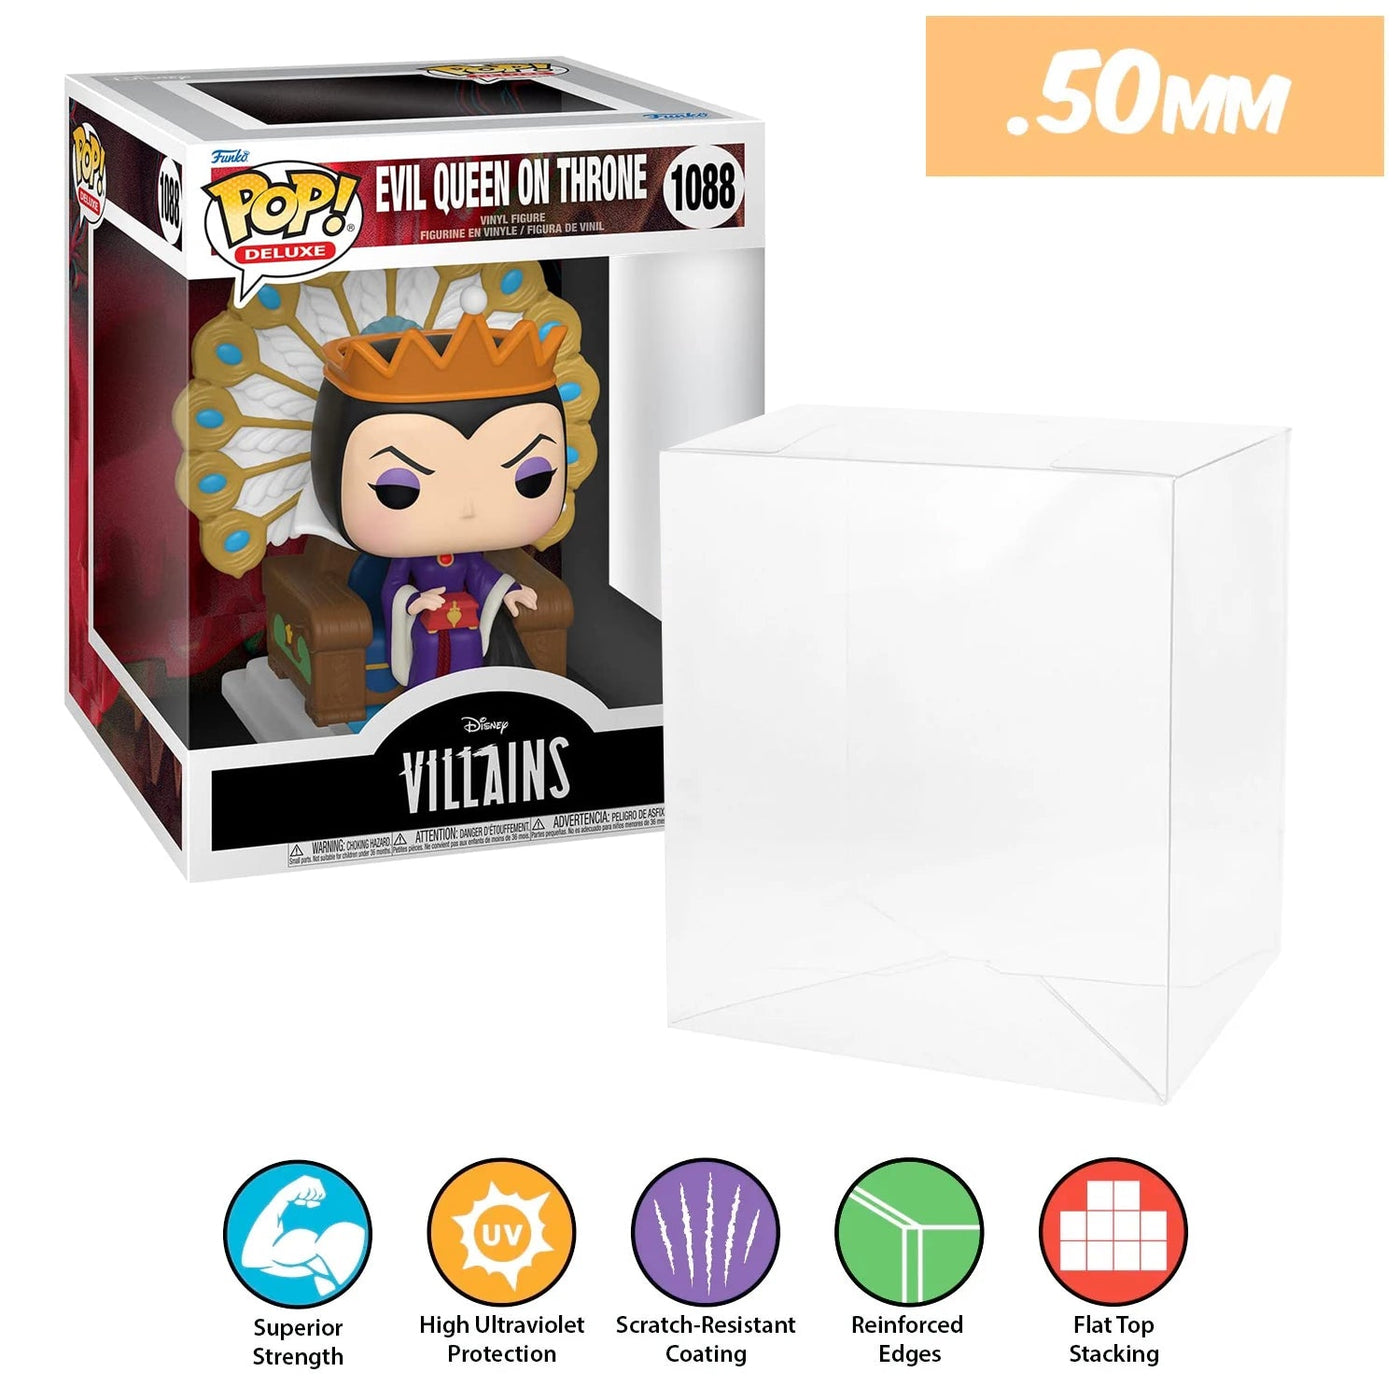 disney evil queen on throne pop deluxe best funko pop protectors thick strong uv scratch flat top stack vinyl display geek plastic shield vaulted eco armor fits collect protect display case kollector protector